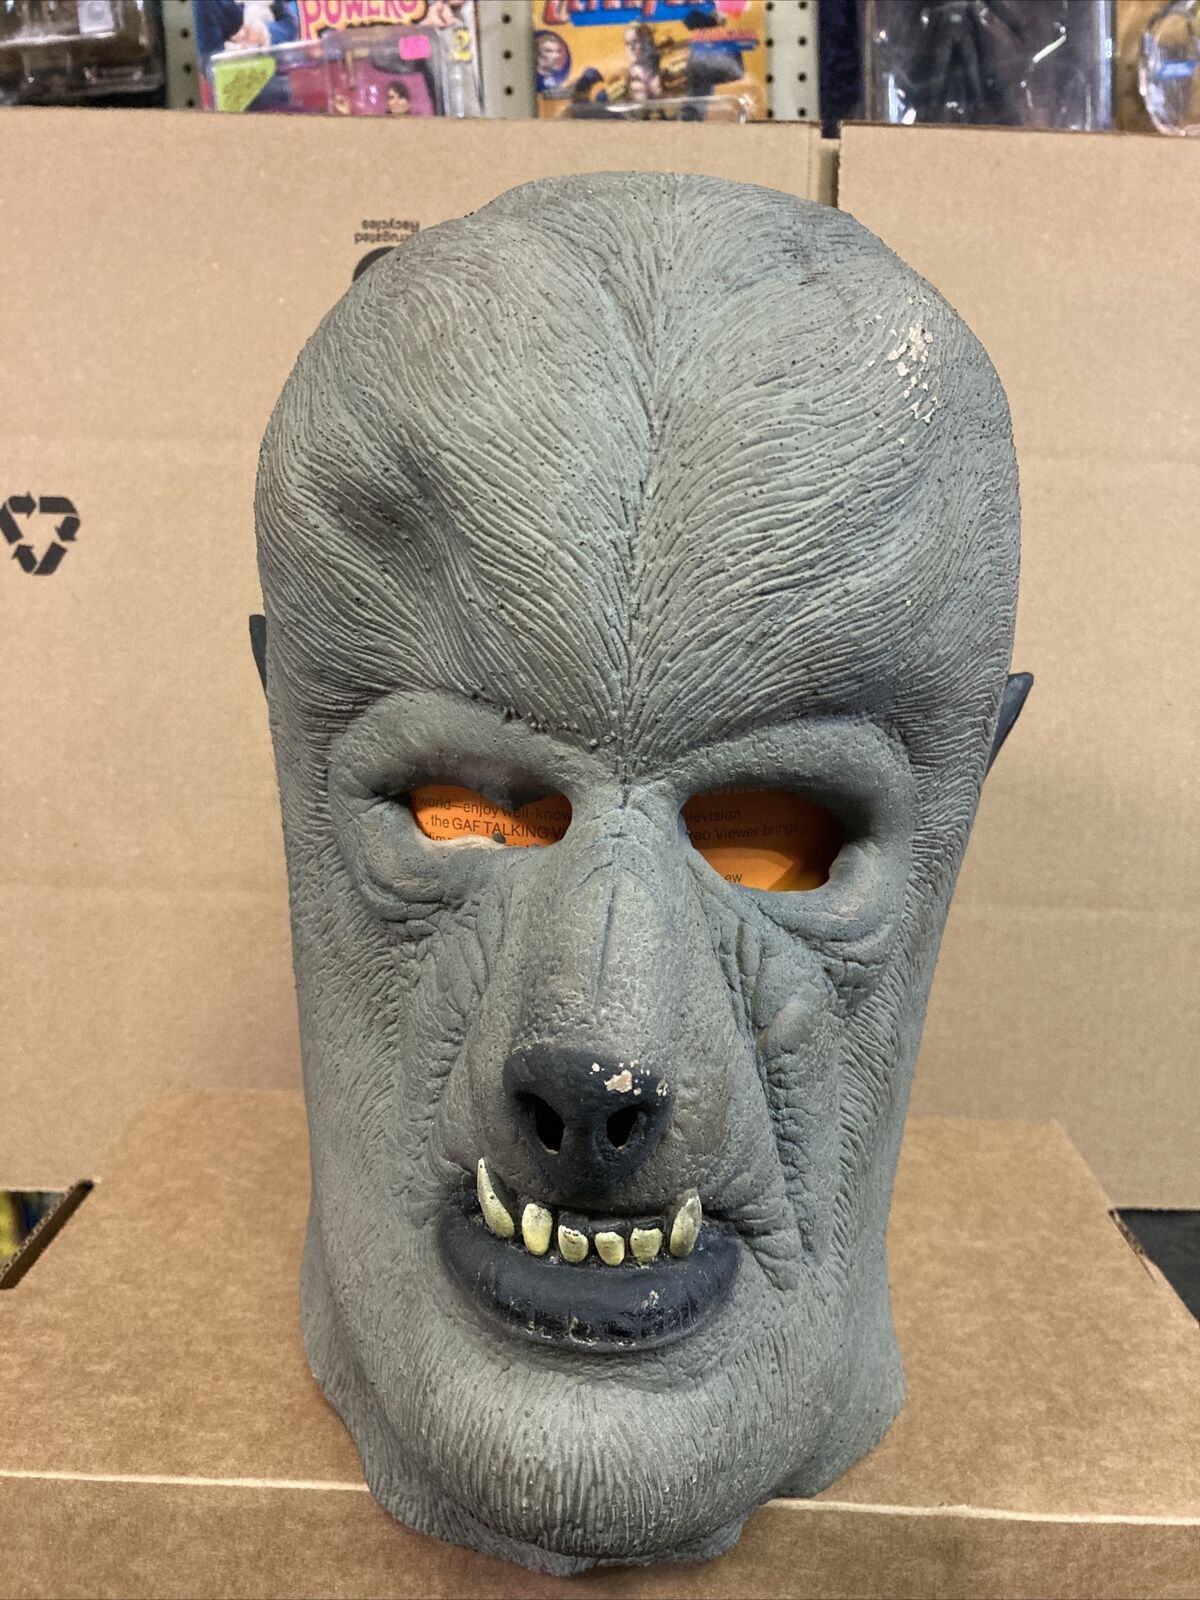 1995 Illusive Concept The Wolfman Silver Screen Display Mask Vintage Horror